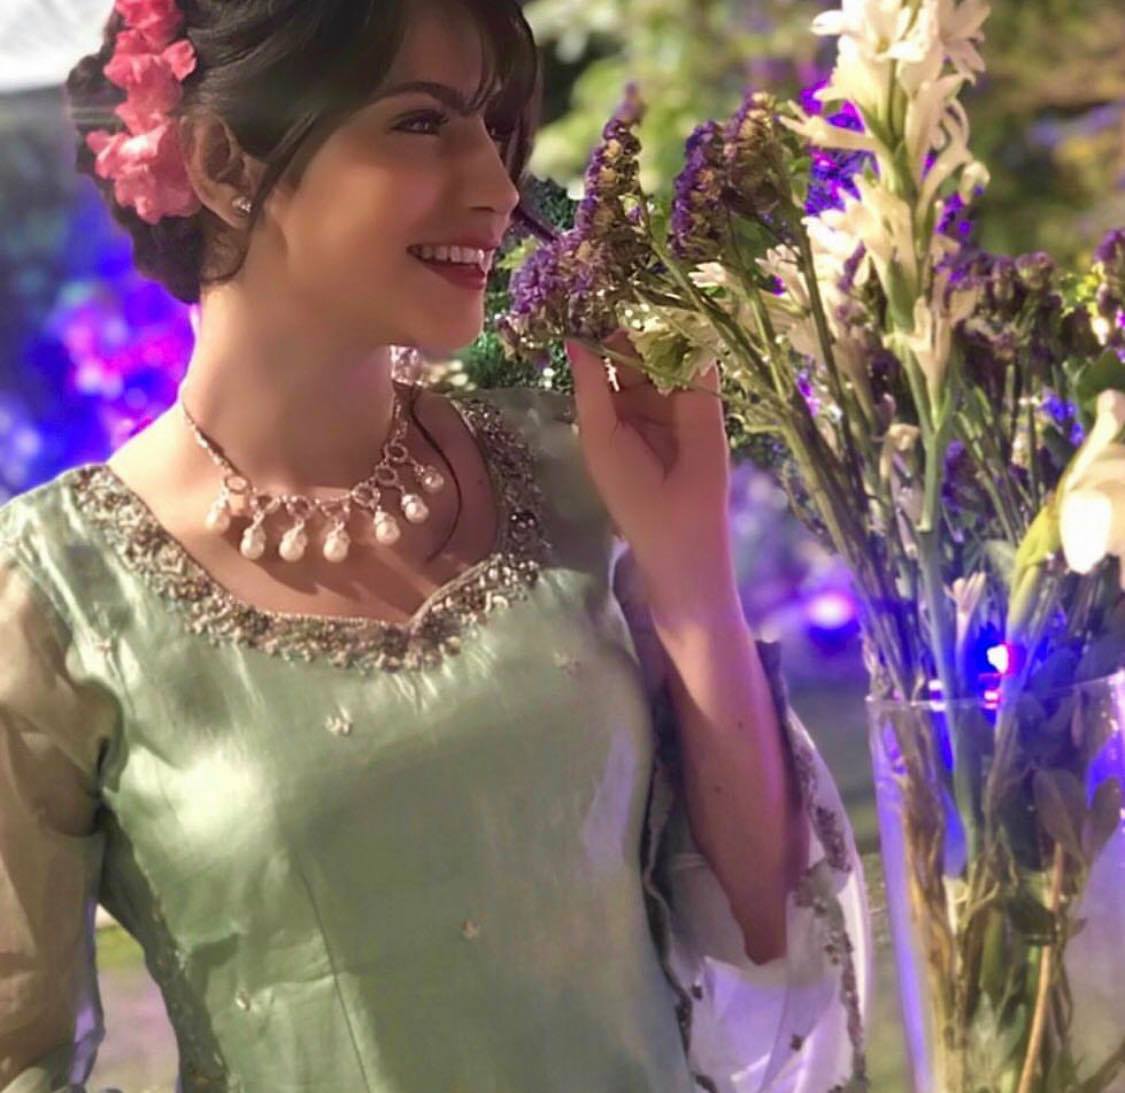 Everything You Need To Know About Neelam Muneer